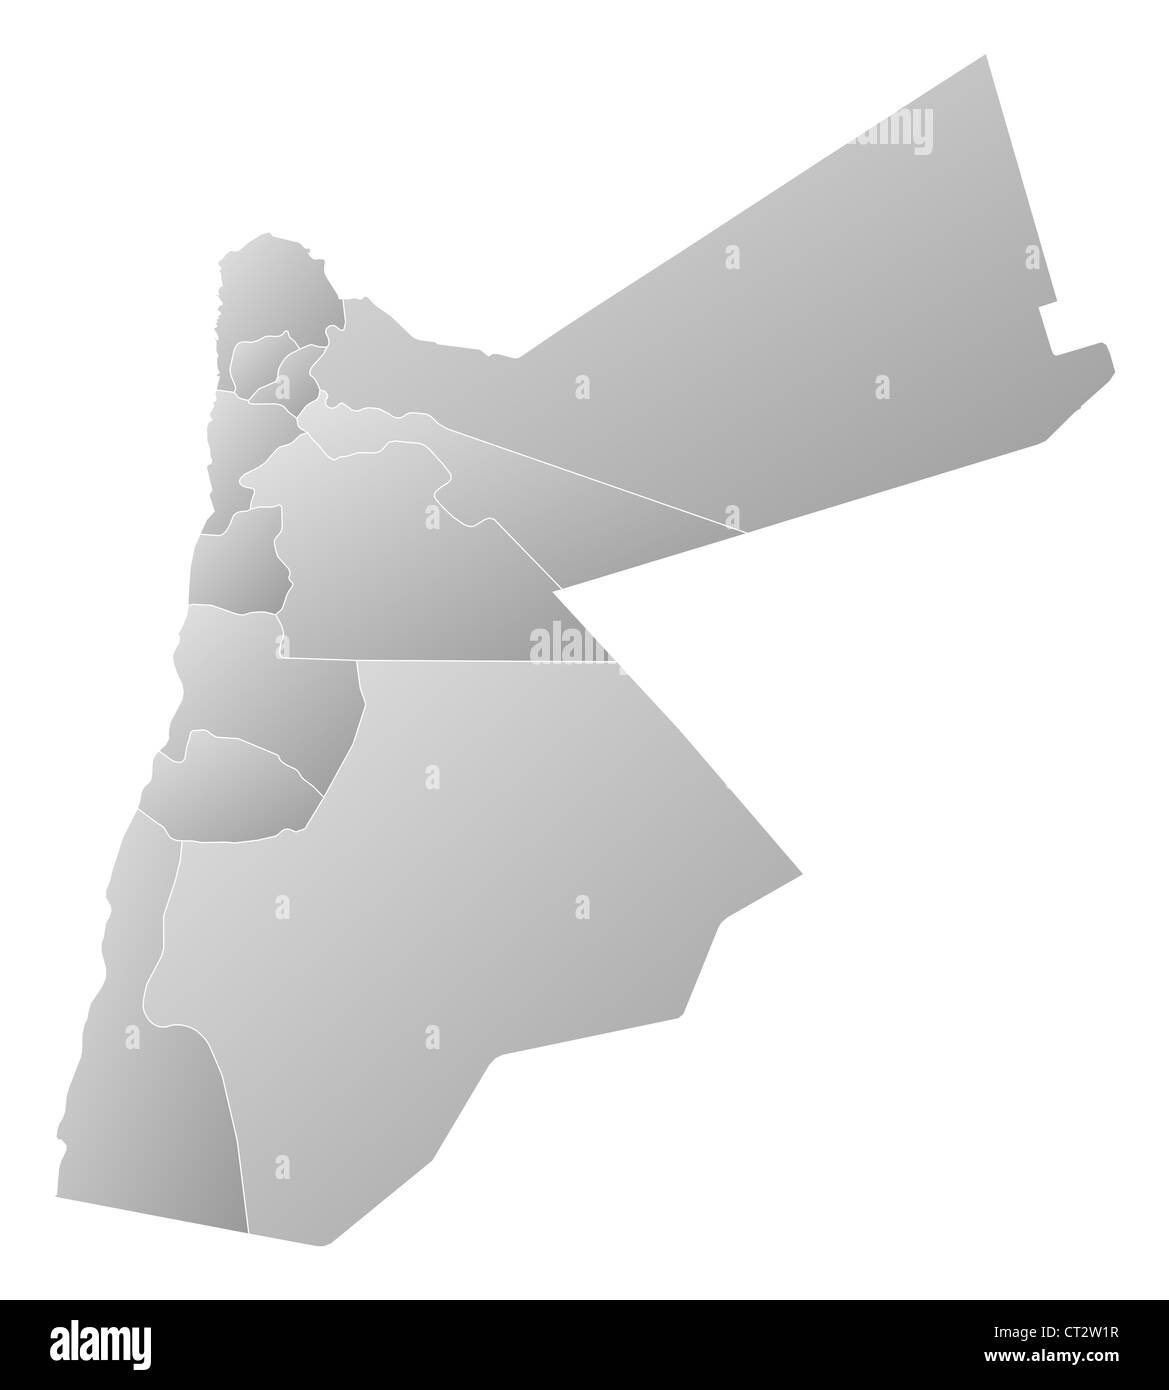 Political map of Jordan with the several governorates. Stock Photo